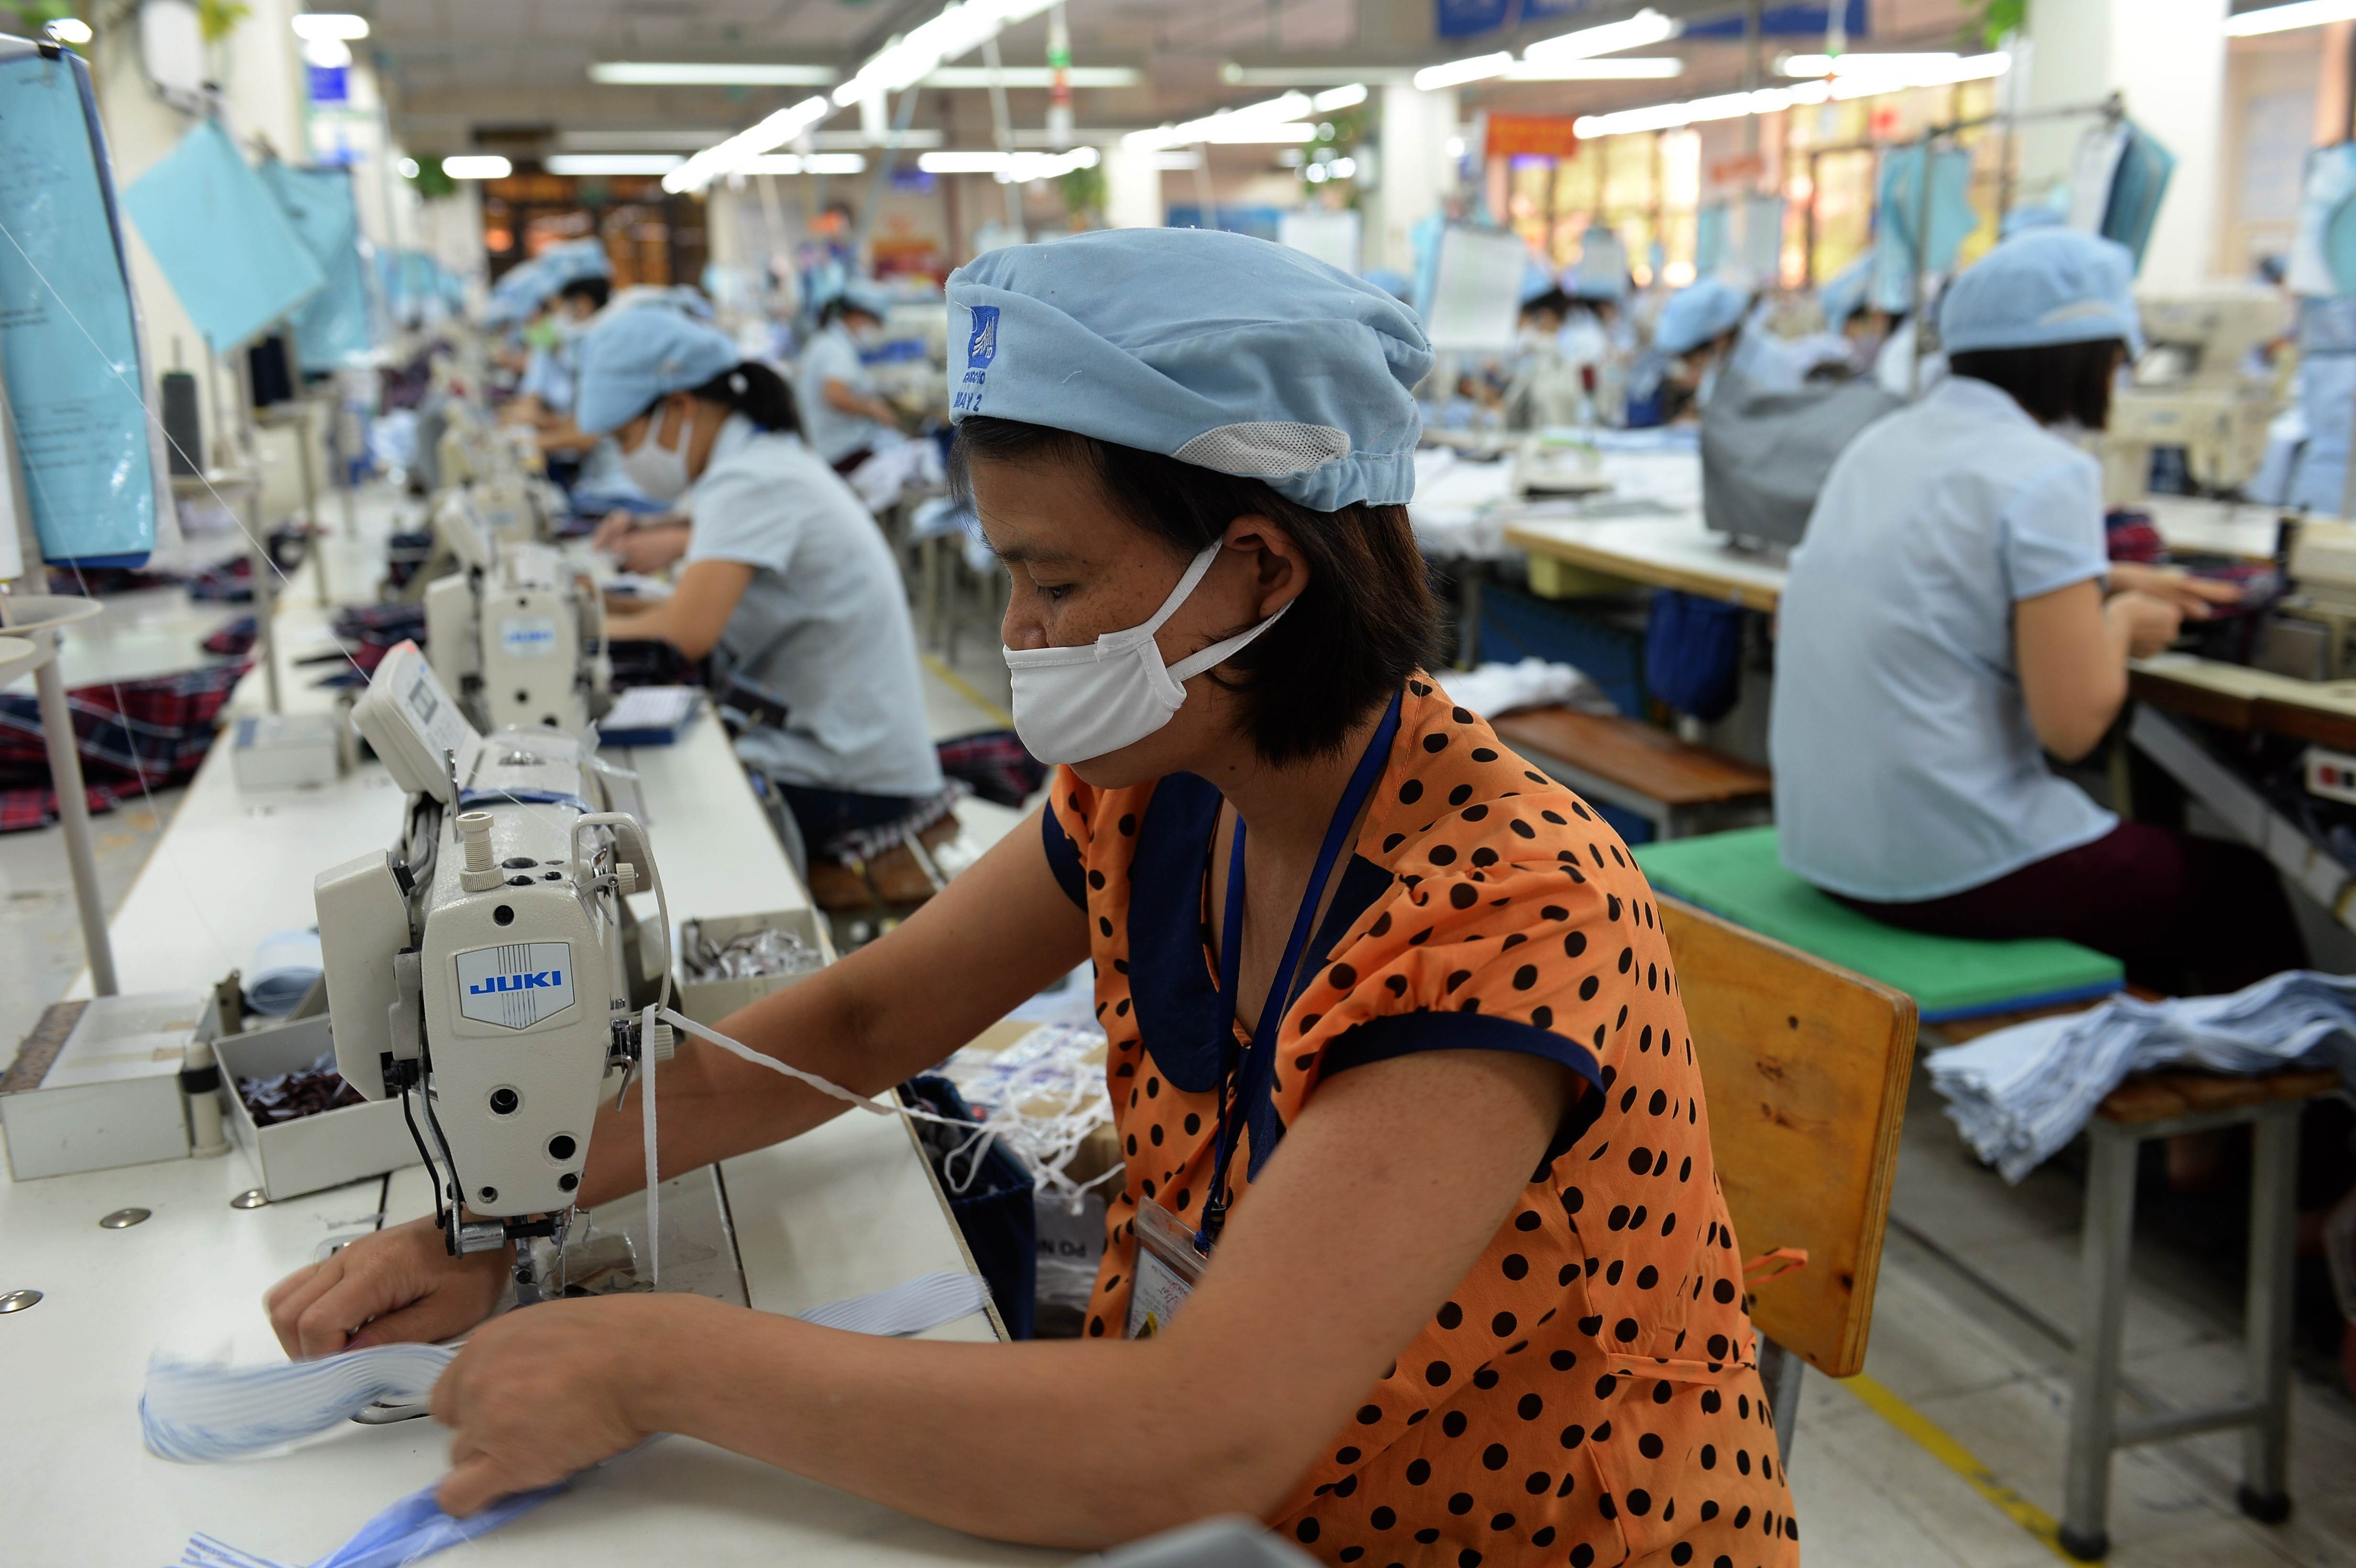 The garment industry is a major source of employment in Vietnam with the bulk of the clothes destined for export. Photo: AFP